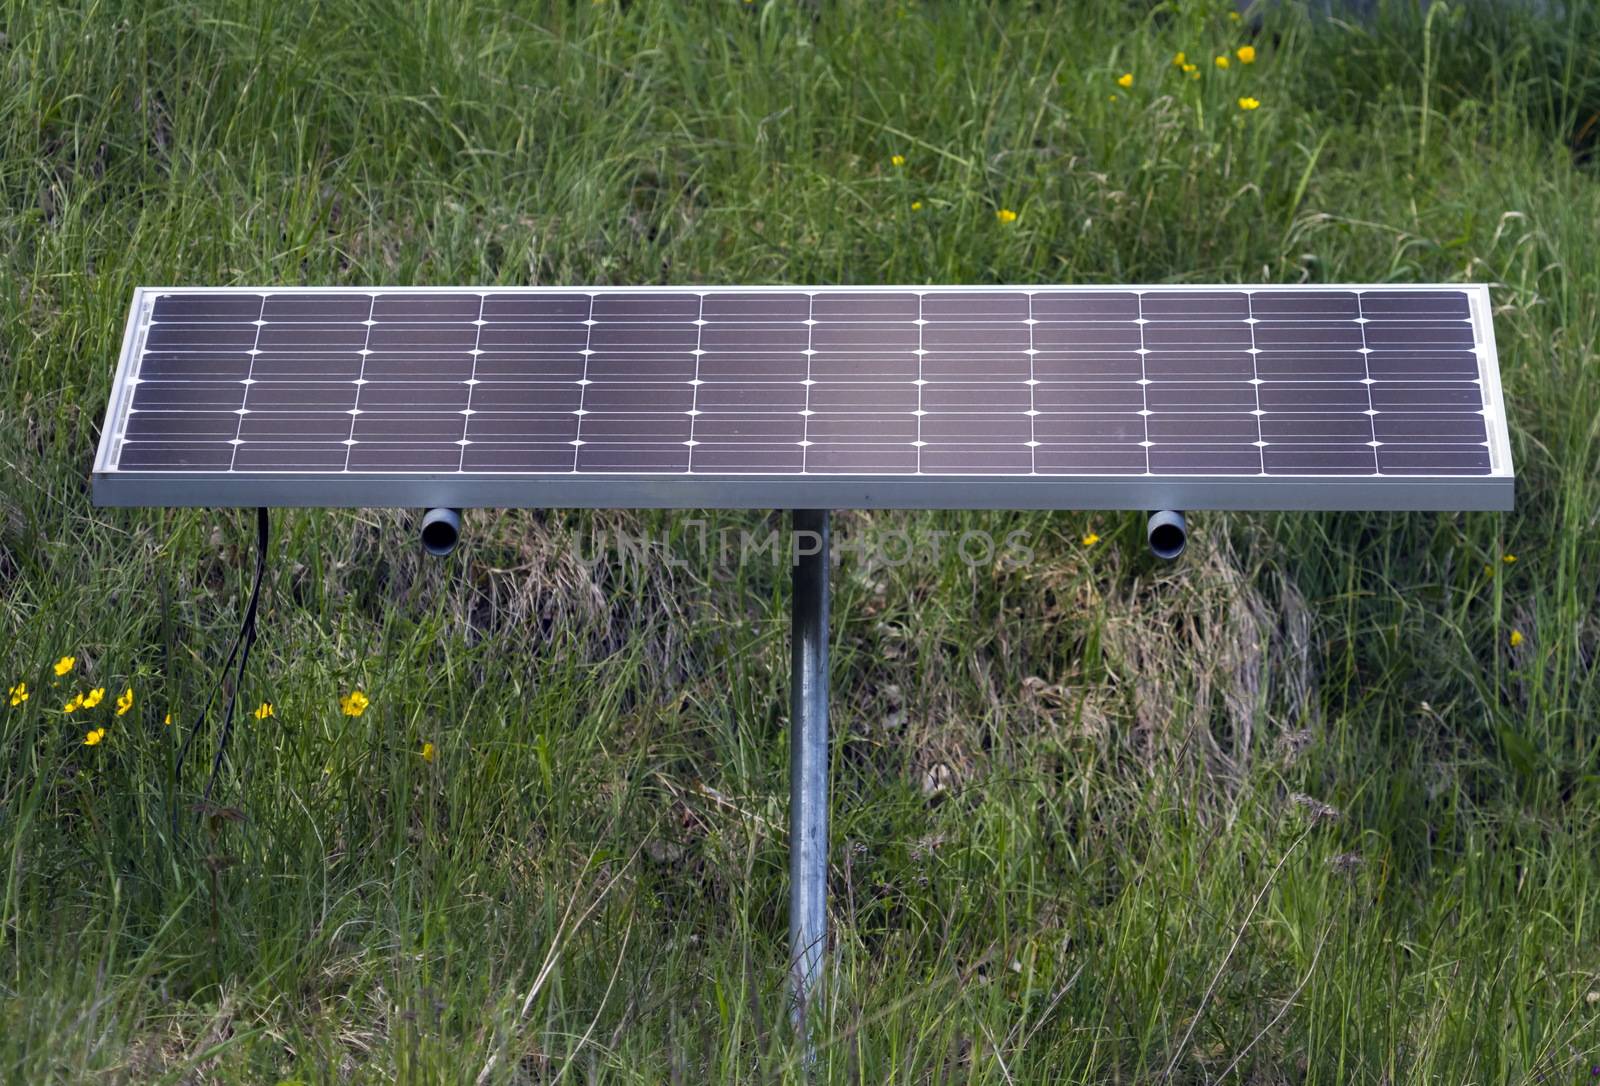 One solar panel standing on the green grass in nature